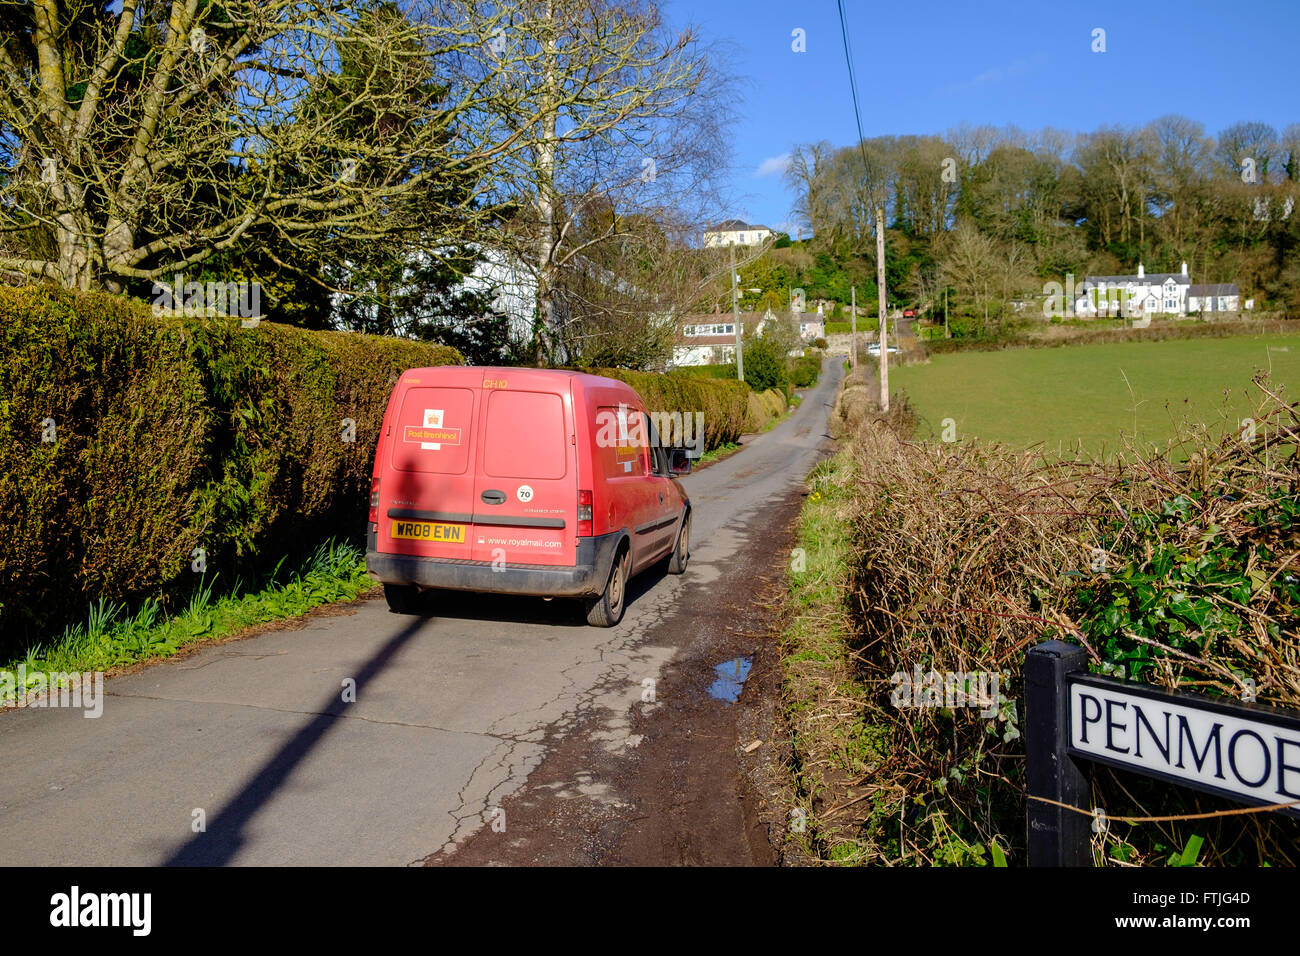 Red Royal Mail post van in country lane delivering post/mail in rural area, in early spring Gloucestershire England UK Stock Photo